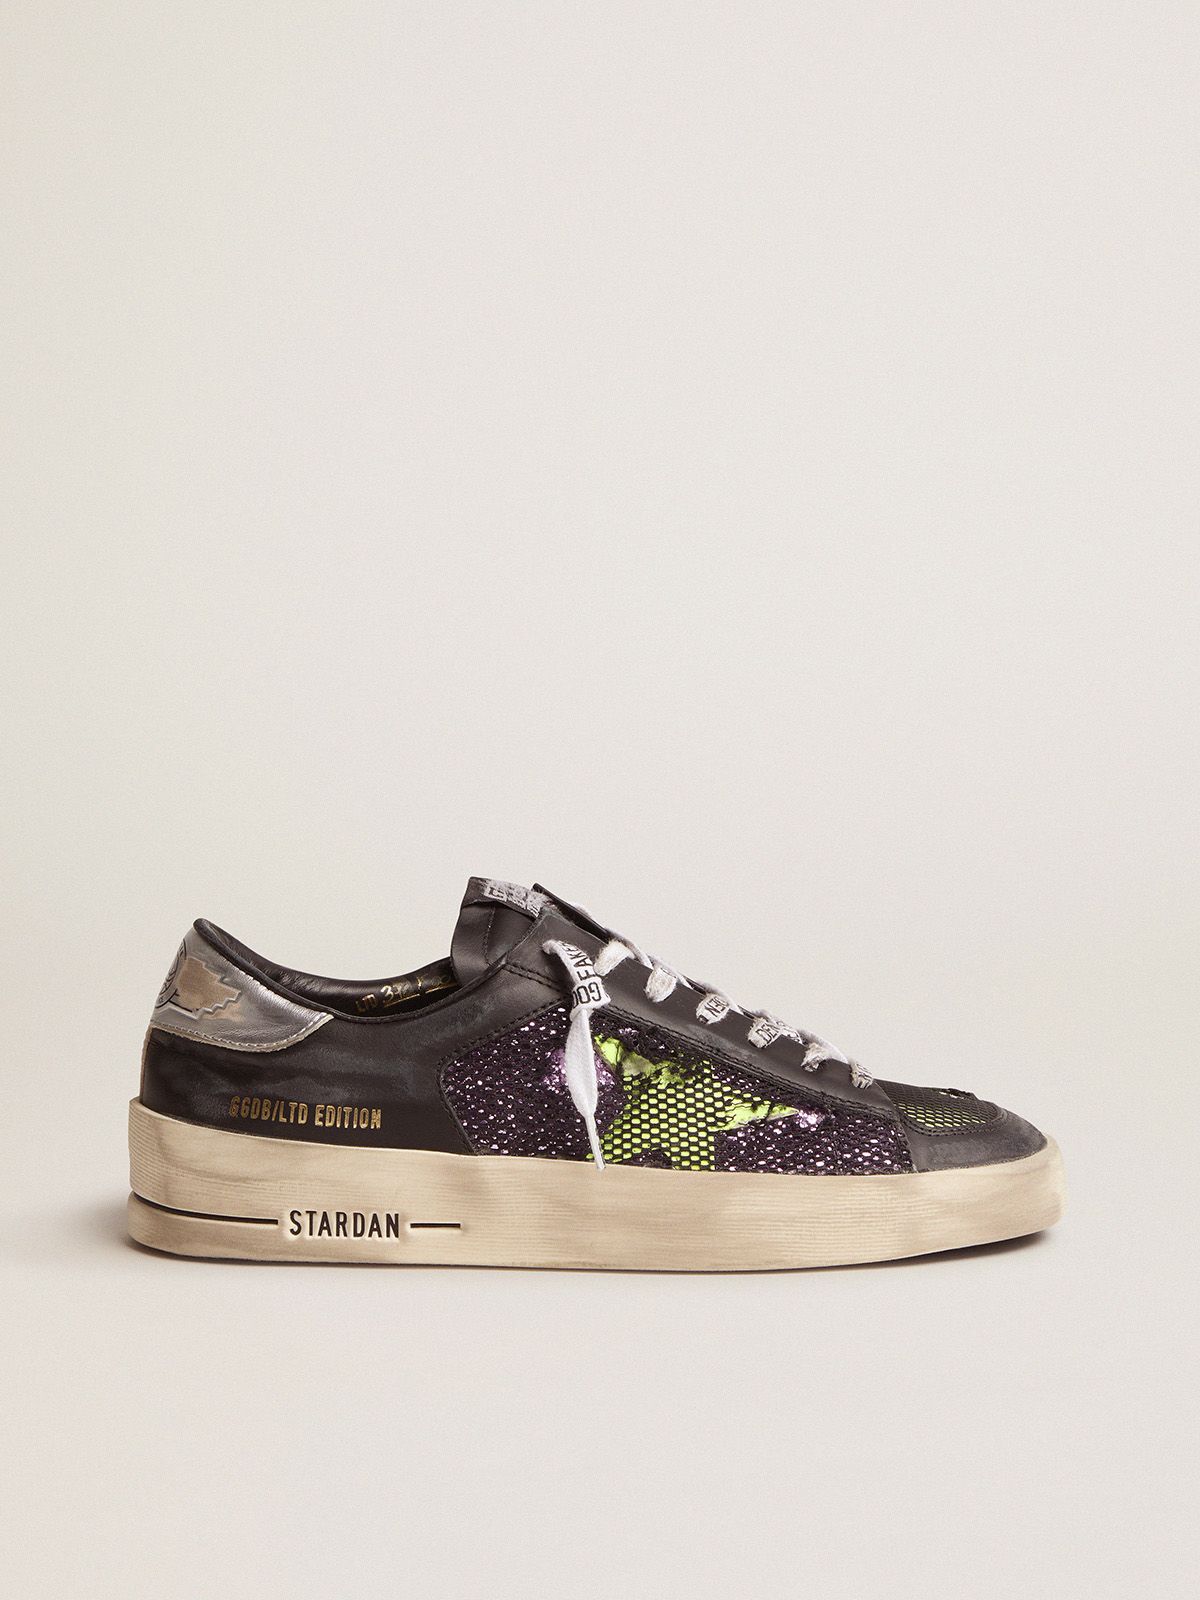 Women’s LAB Limited Edition Stardan sneakers with glitter and fluorescent yellow details